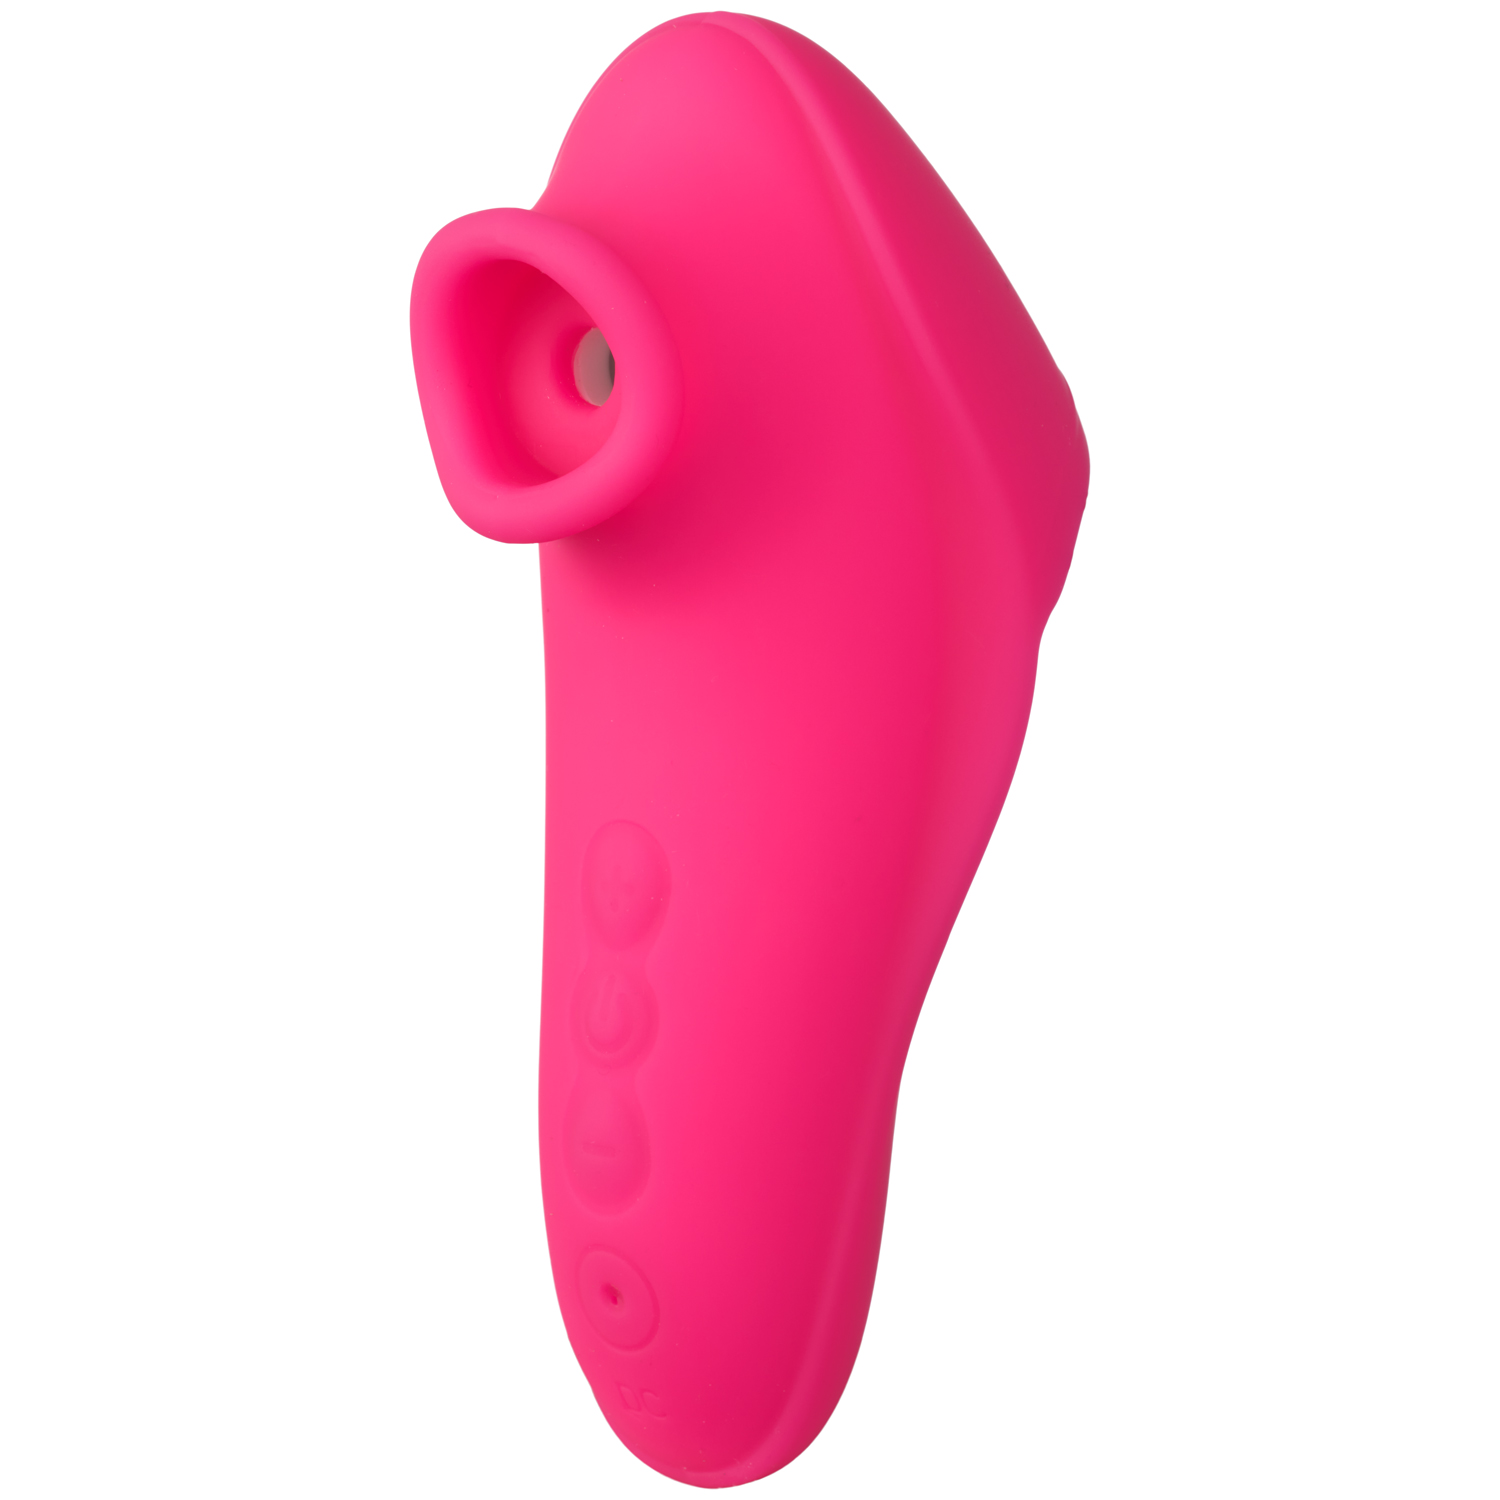 TracyÂ´s Dog Tracy&apos;s Dog Mage Suction Finger Vibrator    - Pink thumbnail